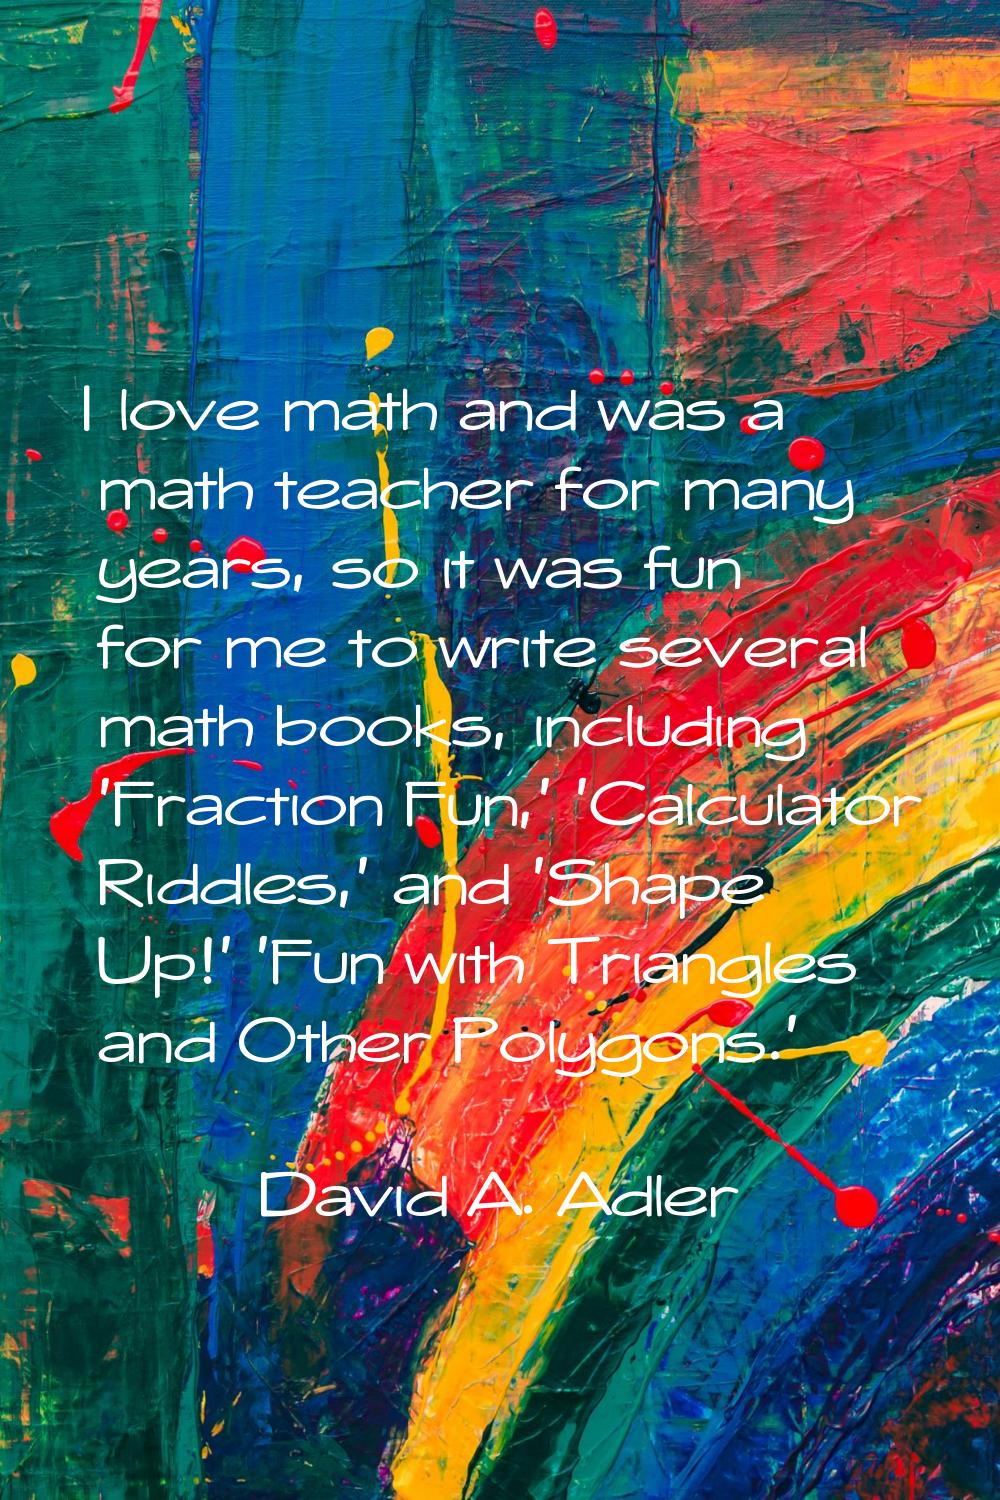 I love math and was a math teacher for many years, so it was fun for me to write several math books